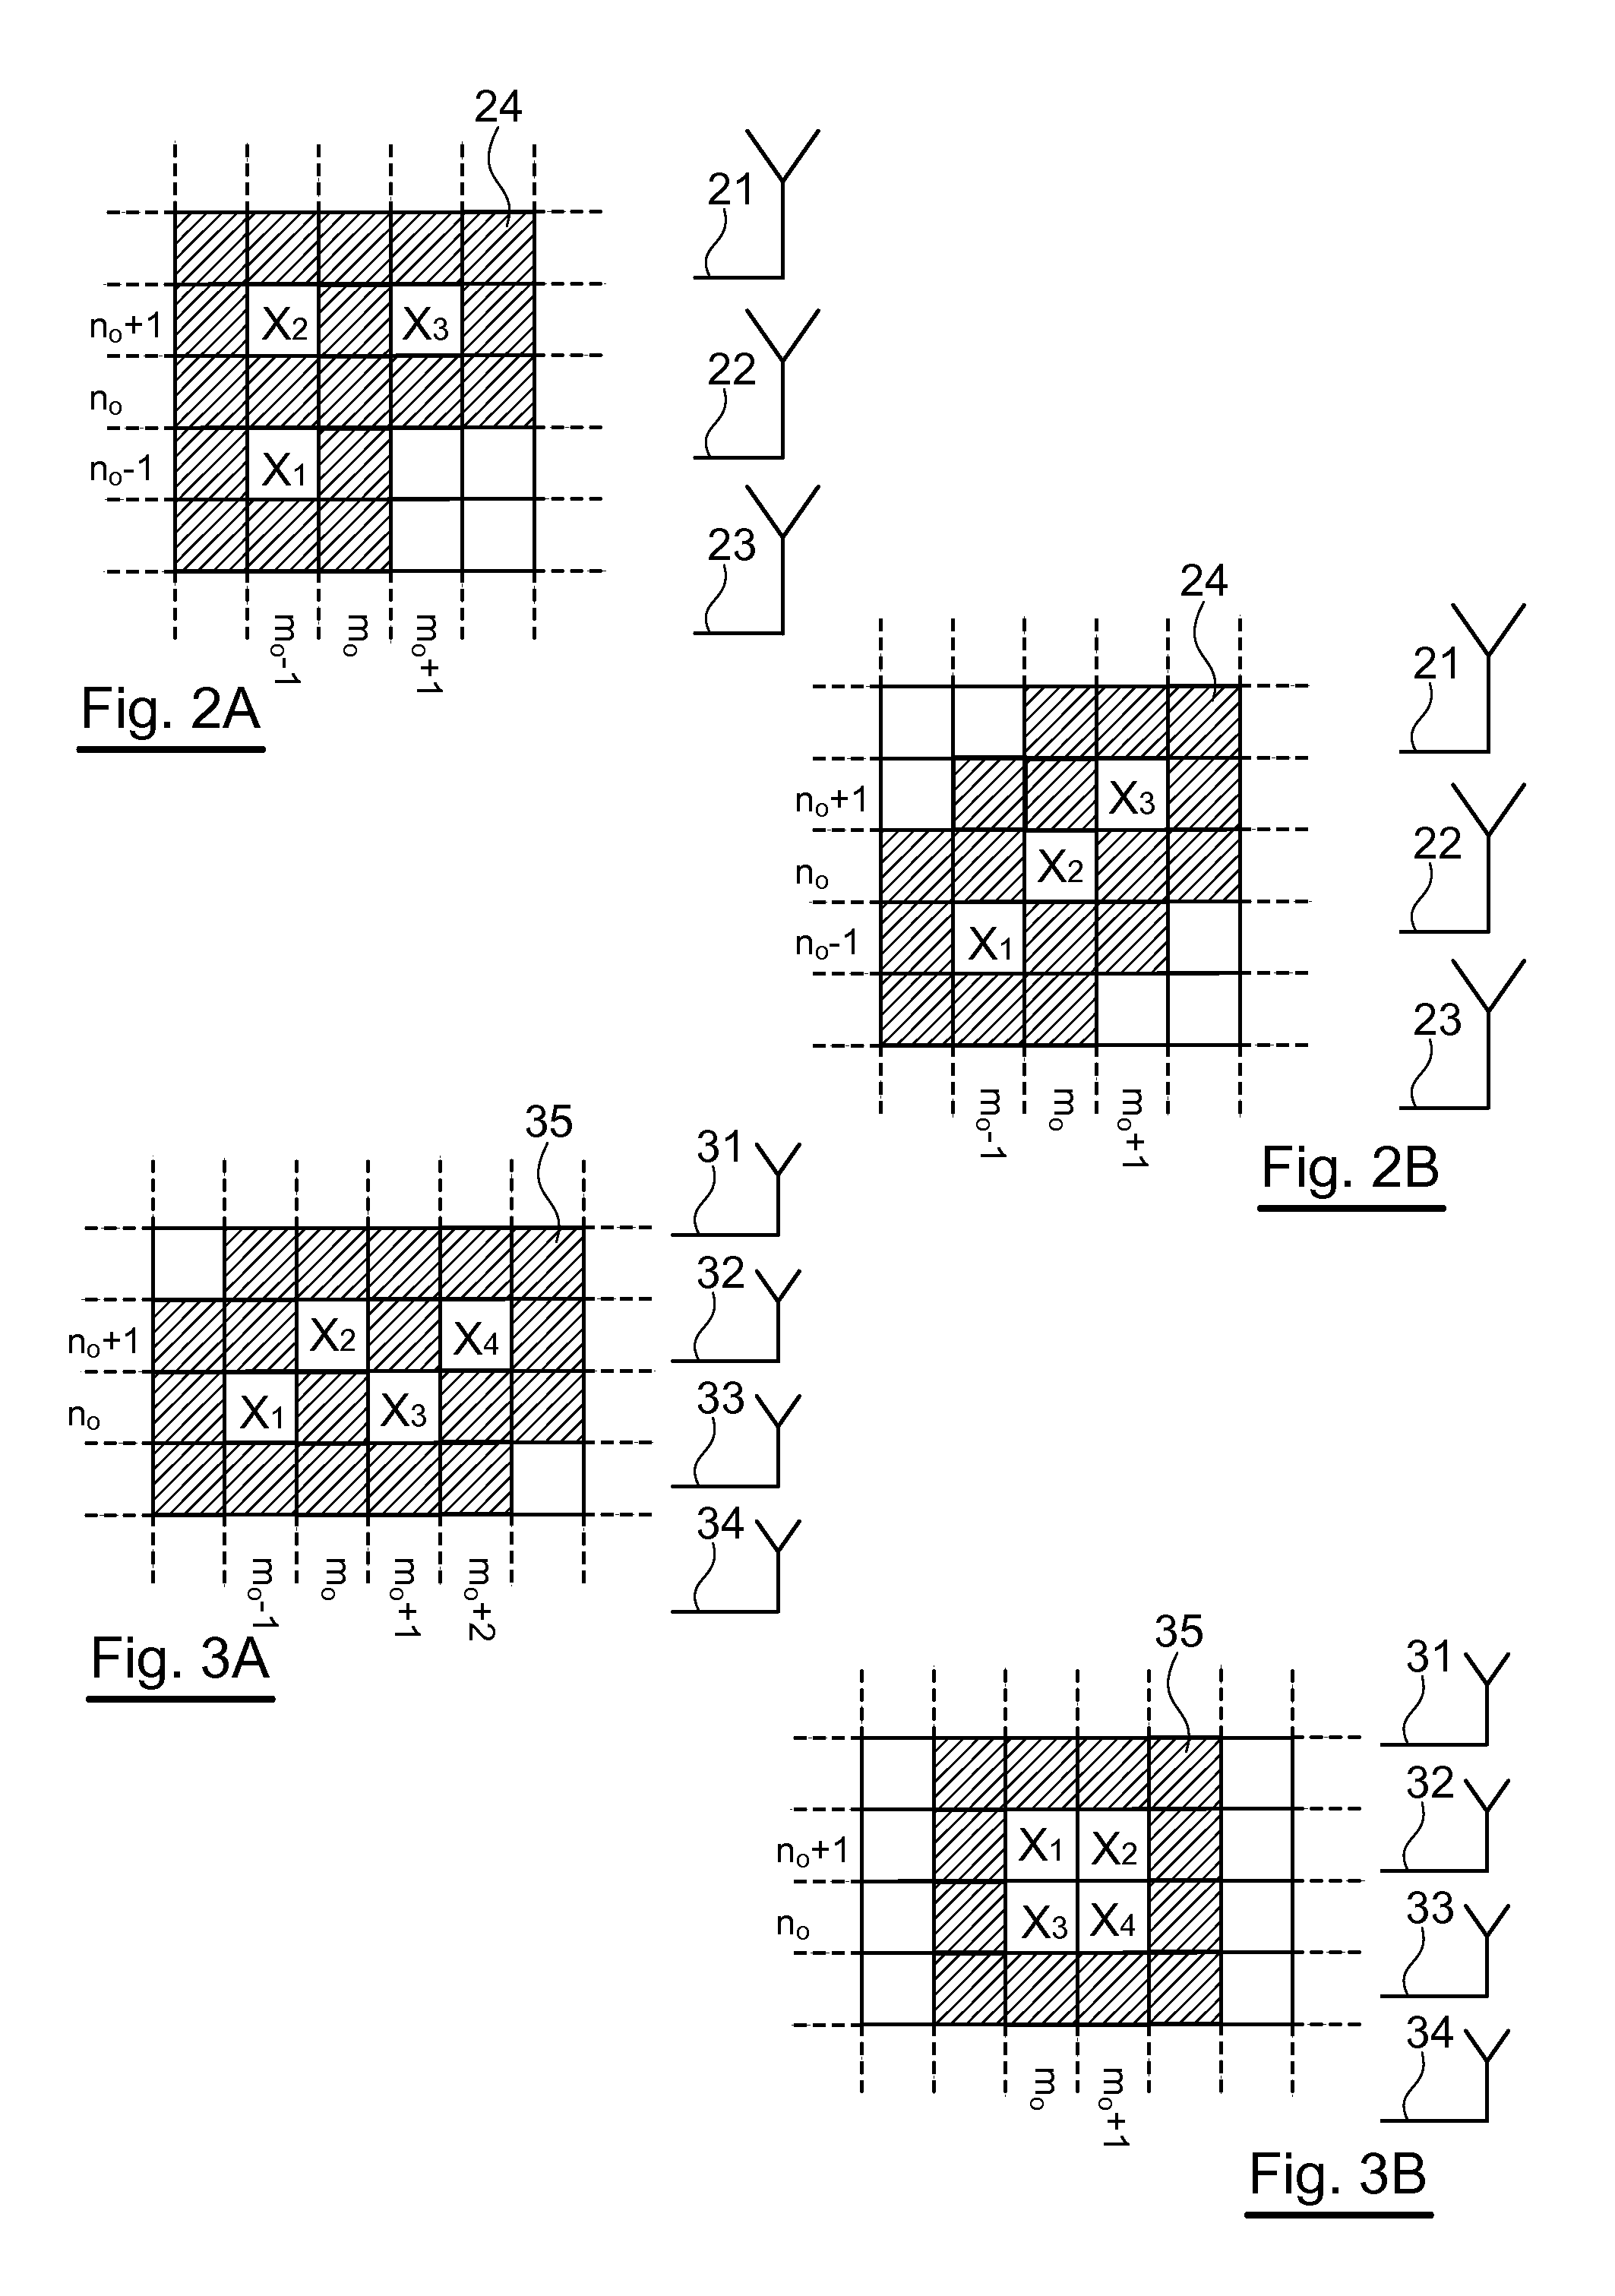 Method for transmitting a multicarrier signal designed for limiting interference, signal, emitting device, receiving method and device and corresponding computer programs